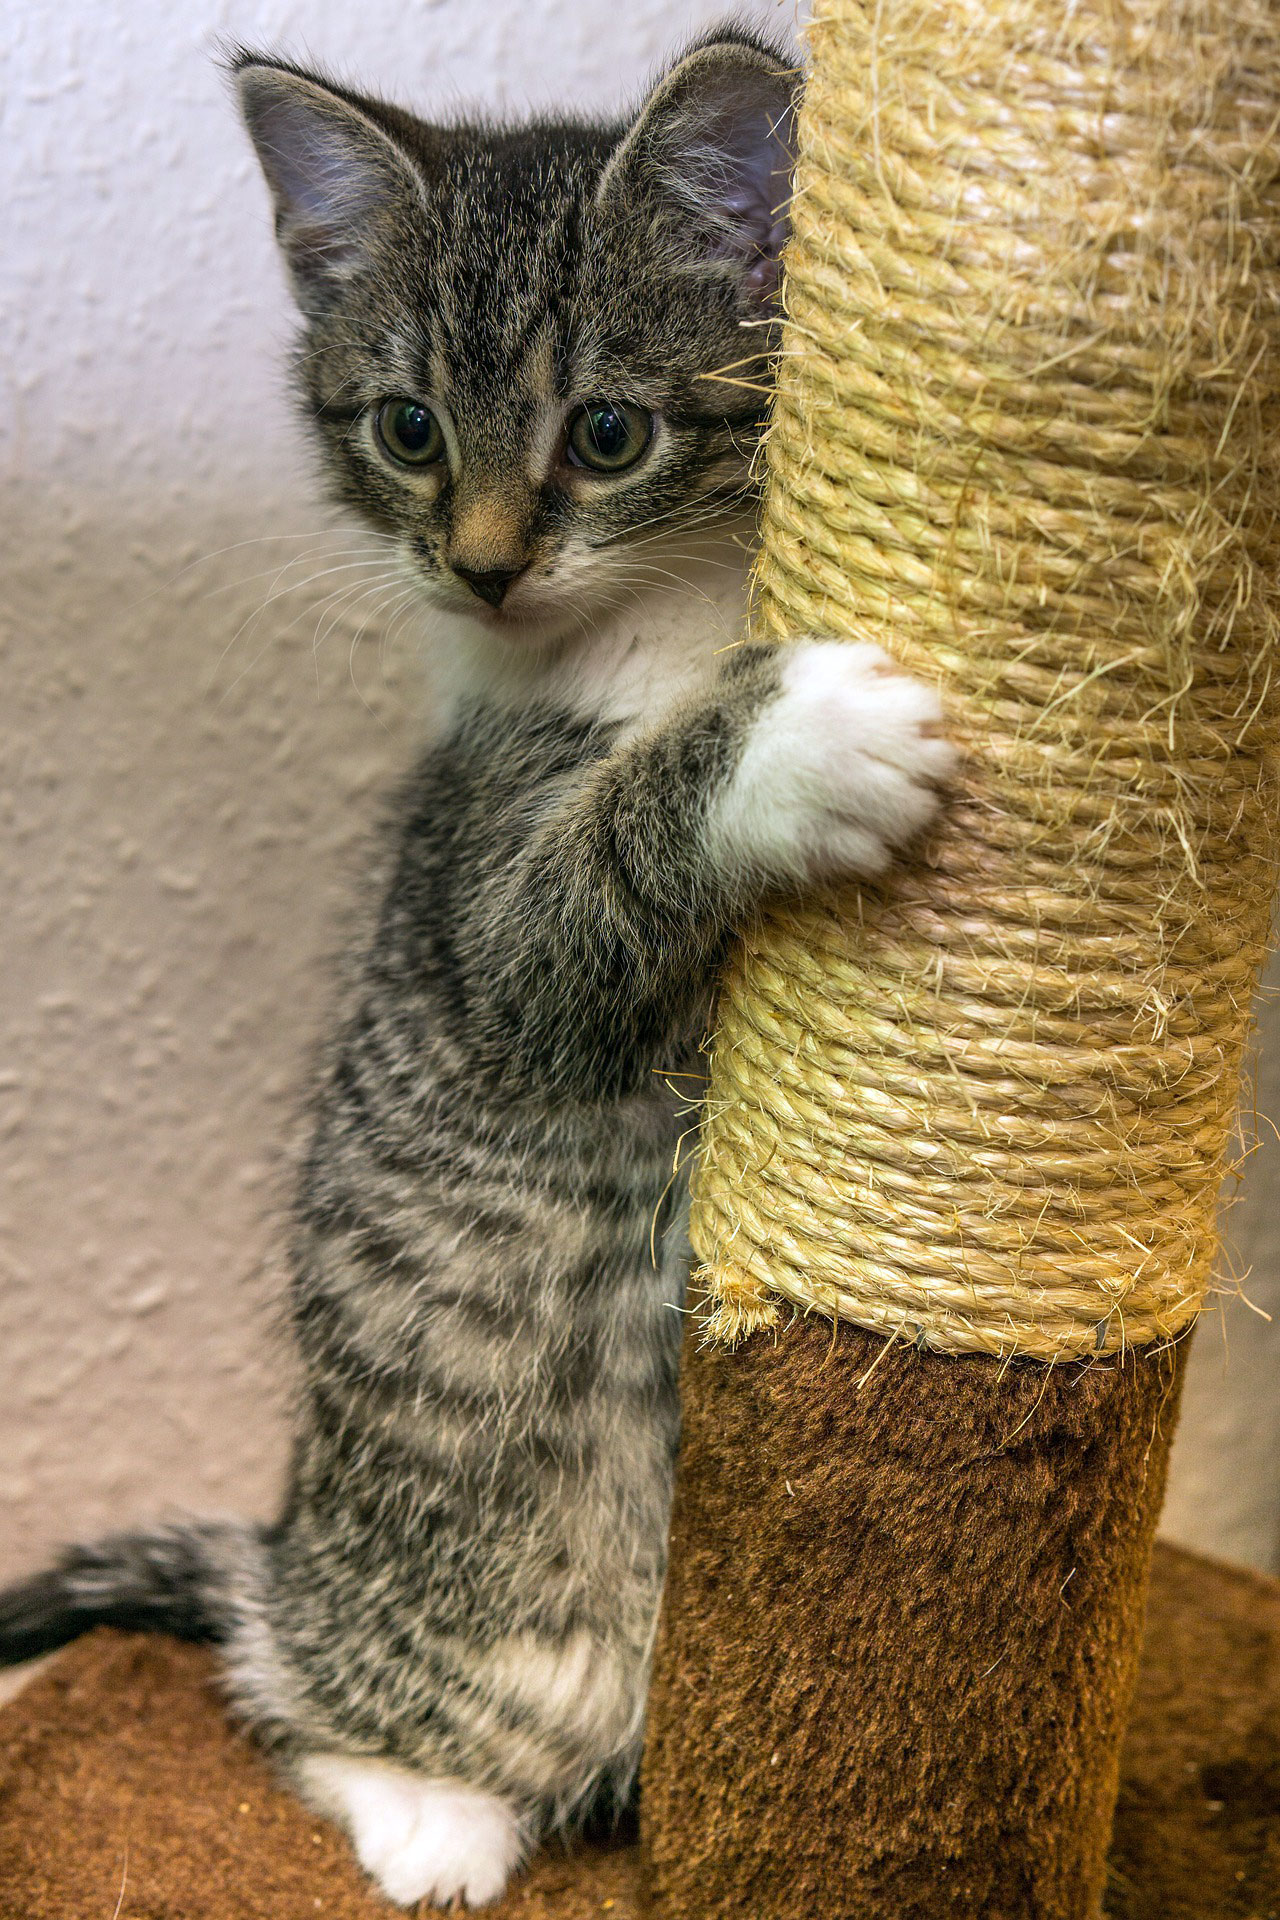 Kitty playing next to its cat tree and scratching the sisal post with one paw